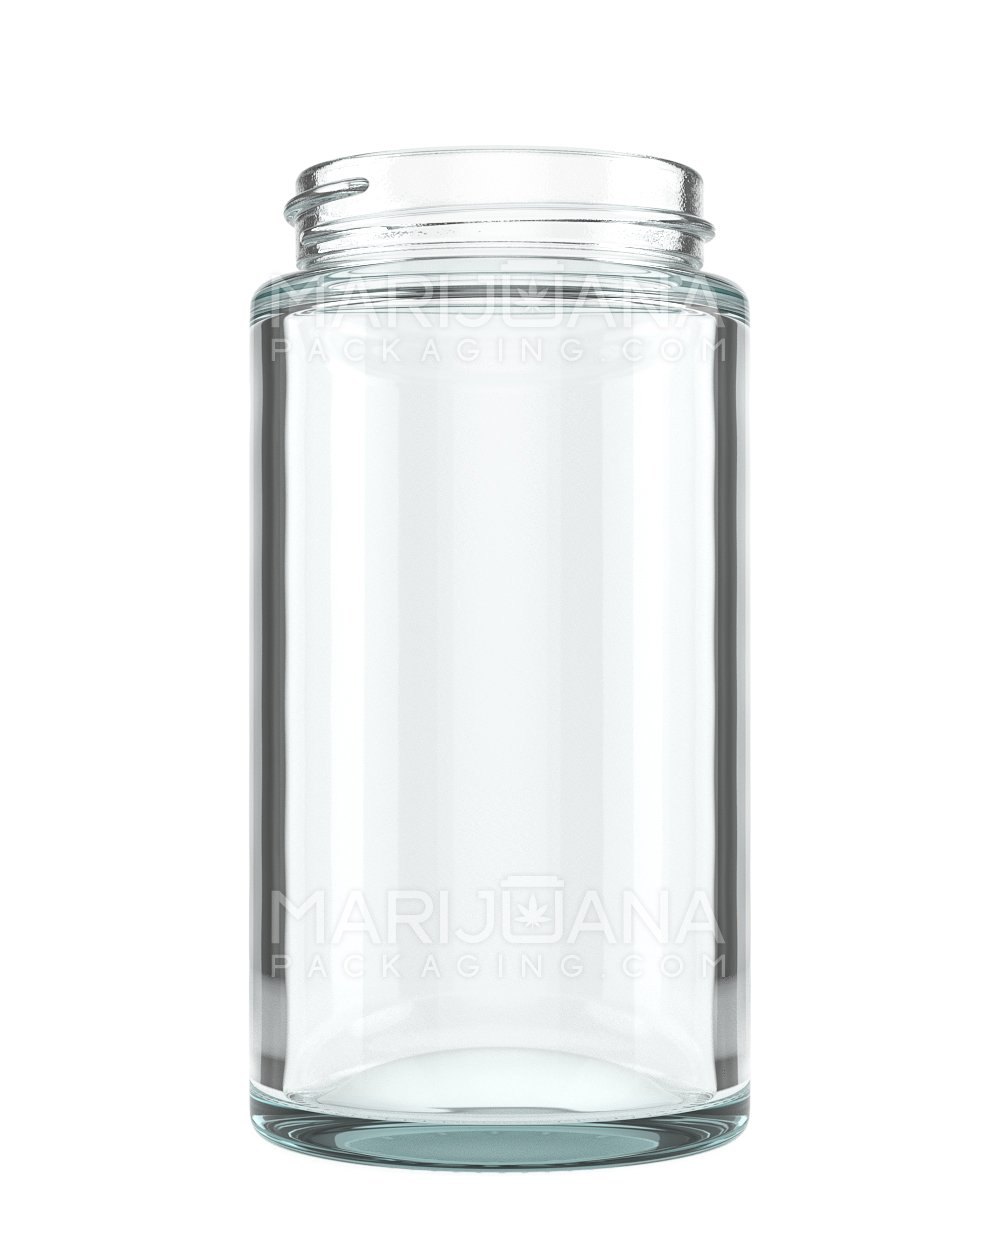 Straight Sided Clear Glass Jars | 50mm - 6oz - 80 Count - 1